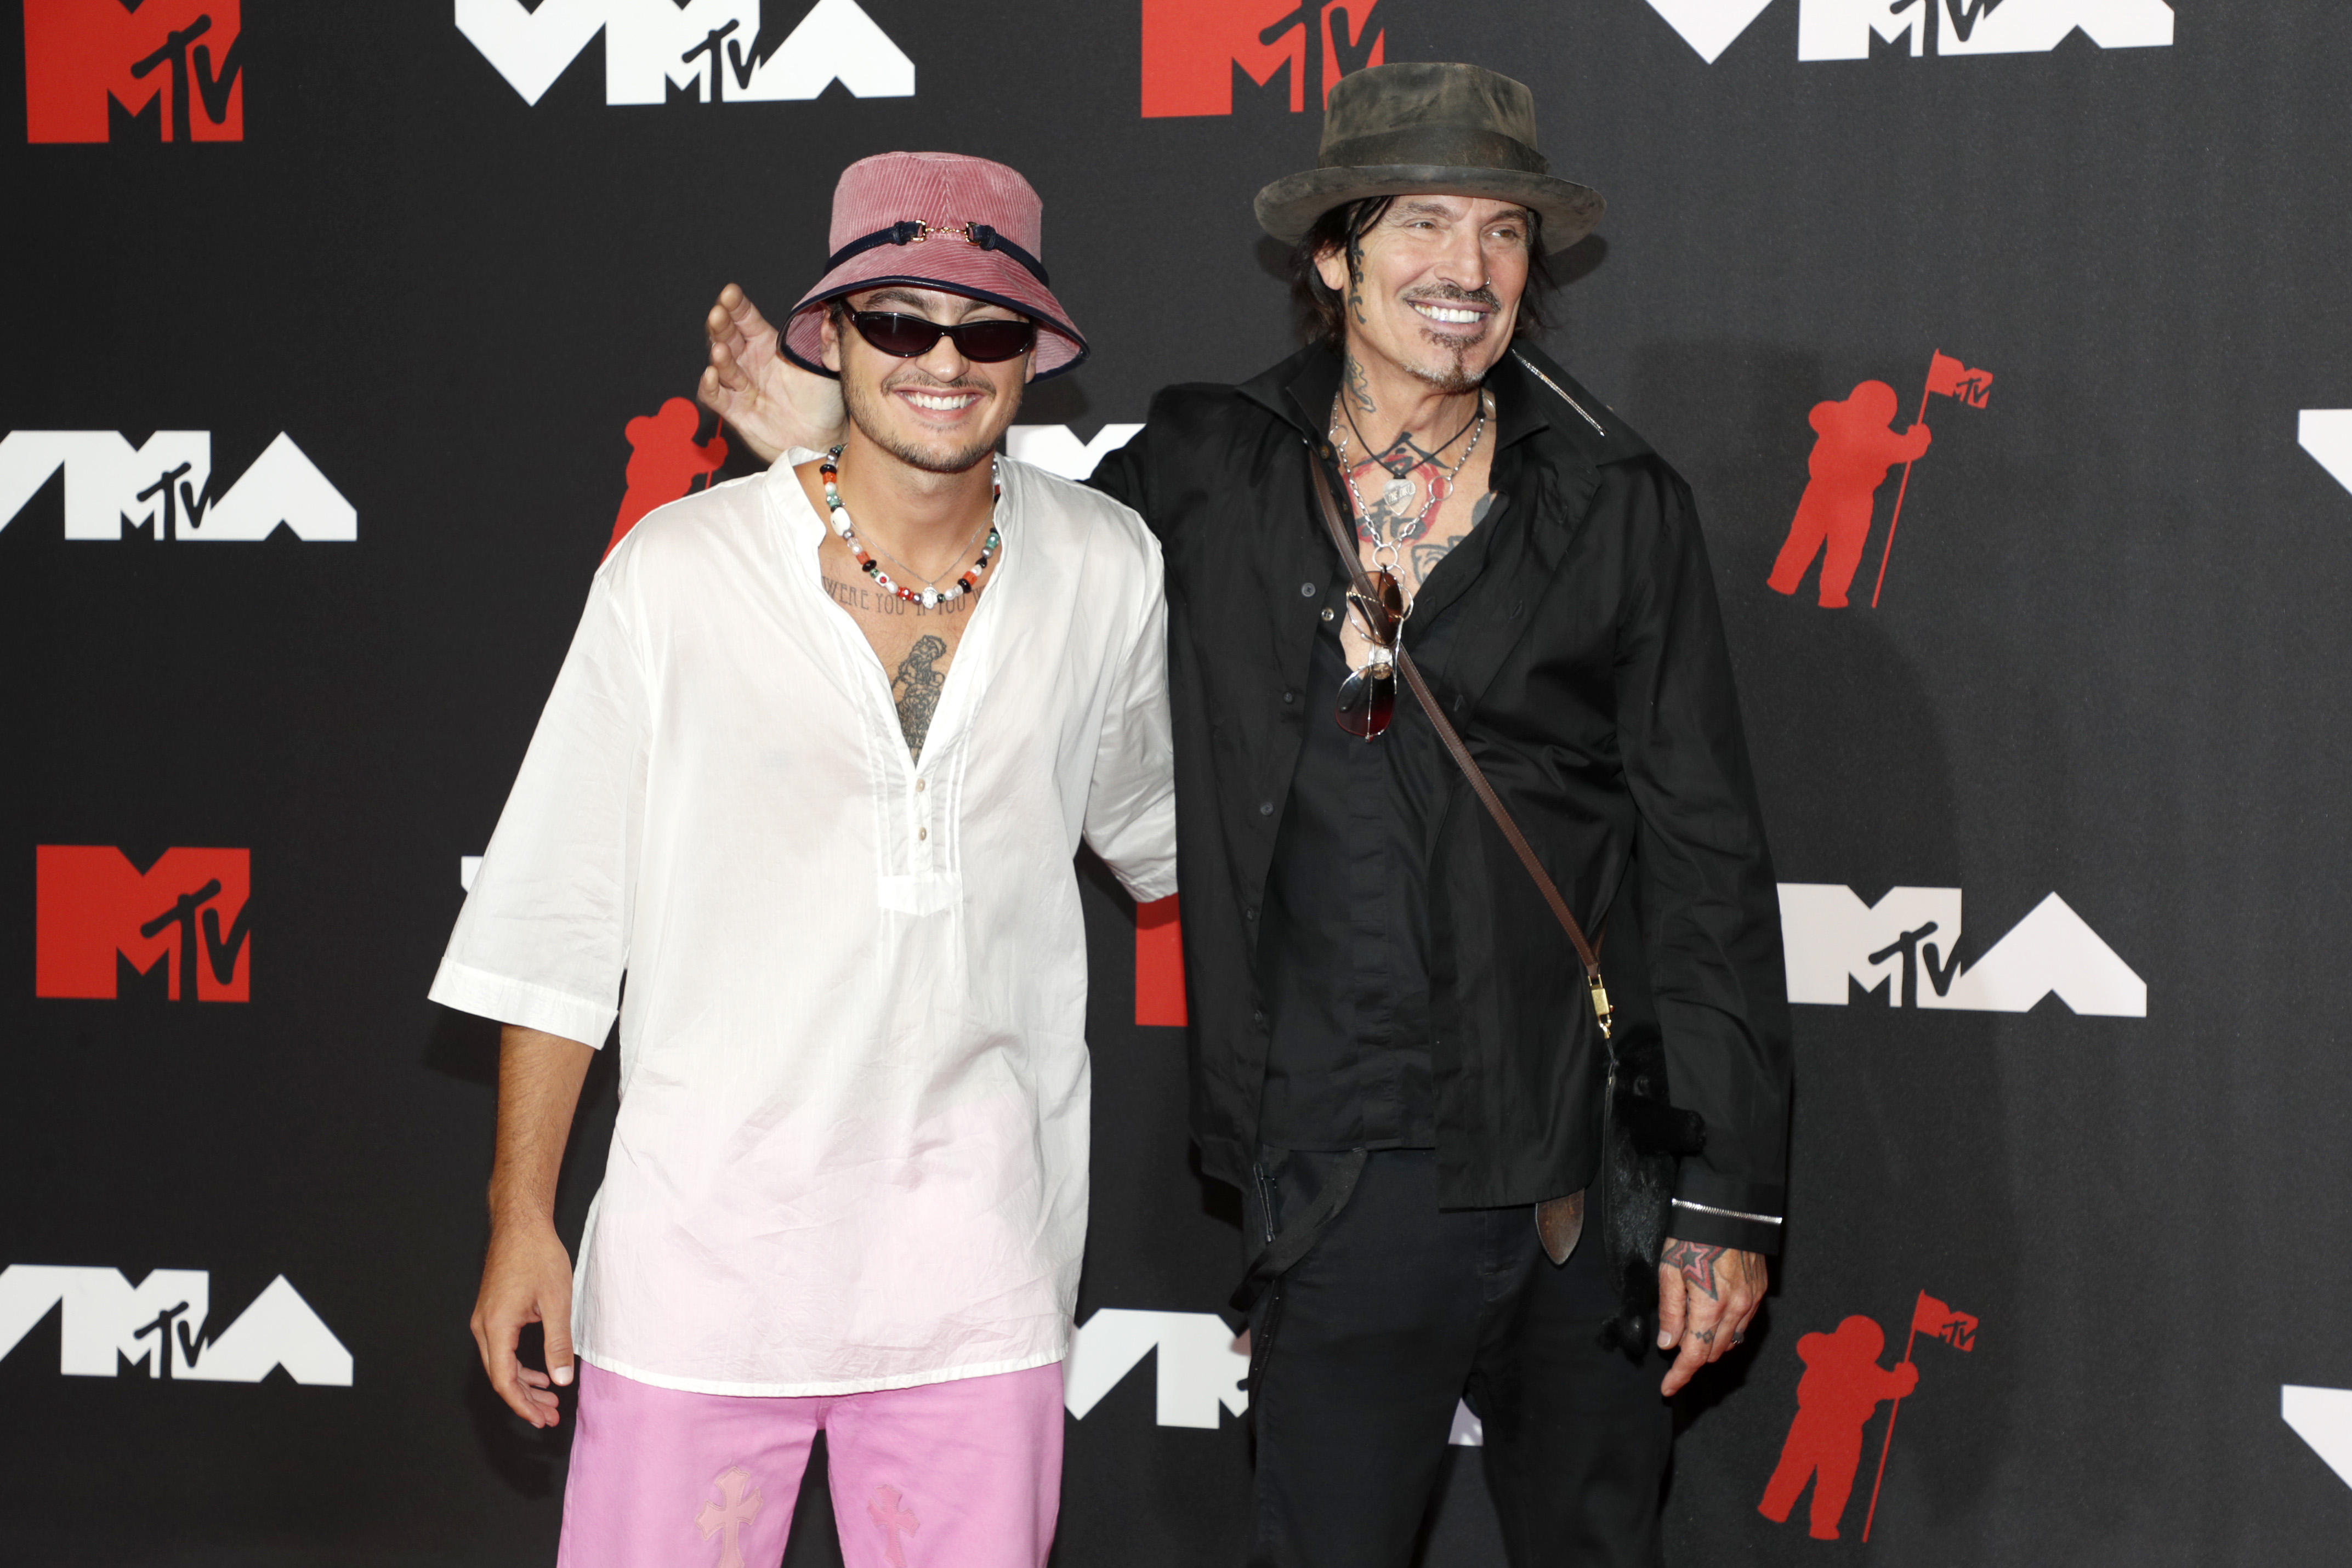 Brandon Thomas Lee and Tommy Lee at the MTV Video Music Awards in New York City on September 12, 2021 | Source: Getty Images